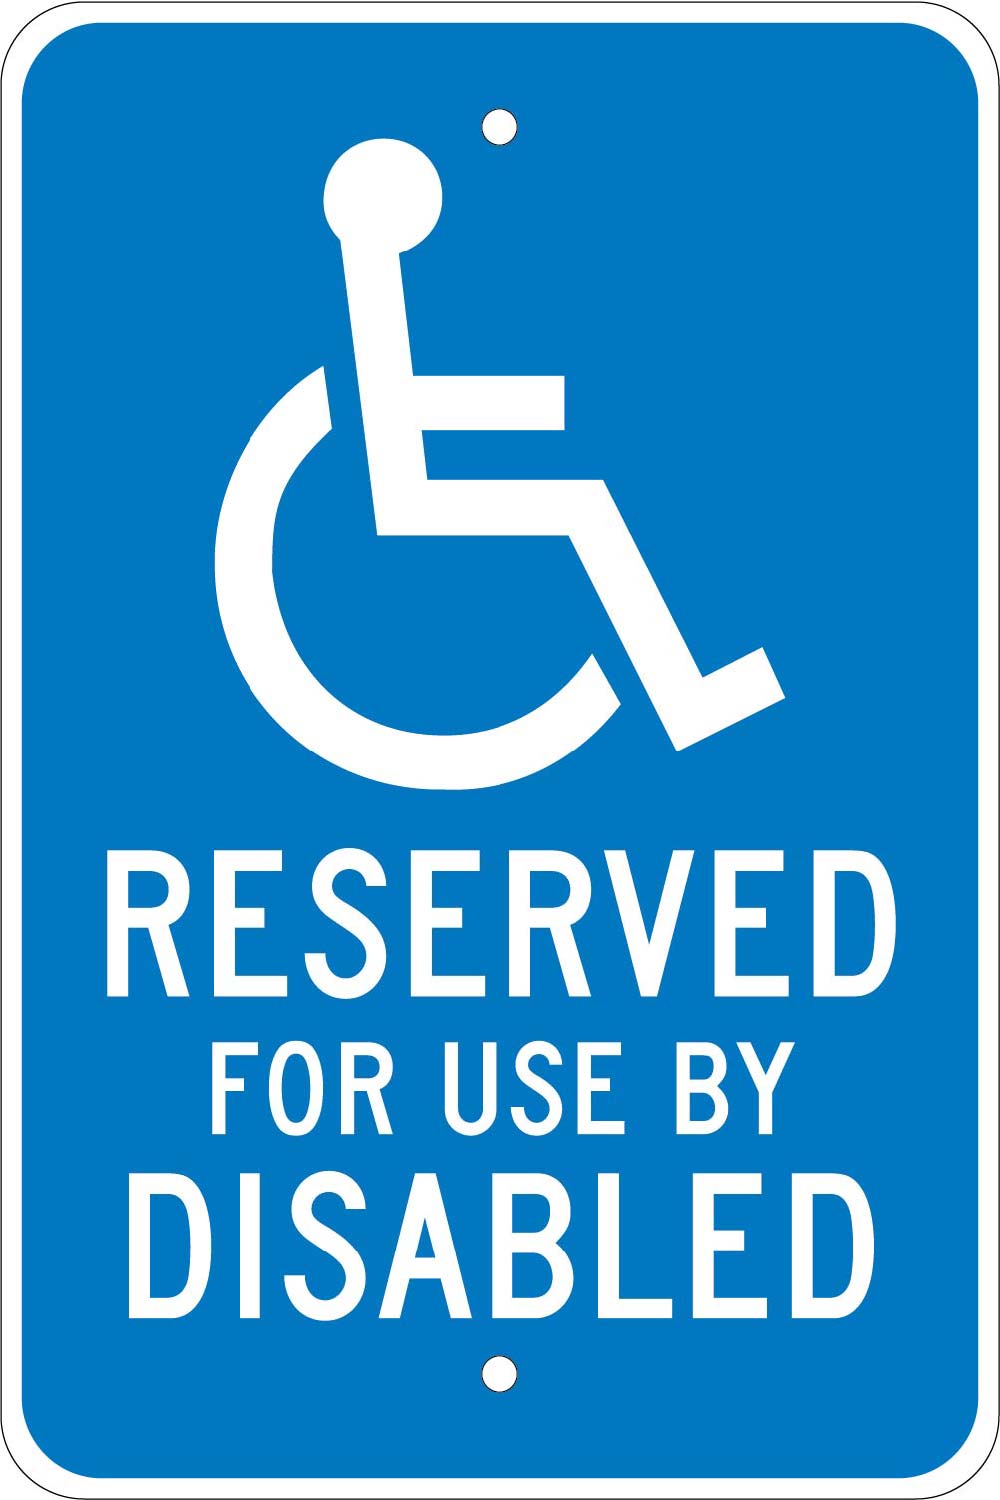 Reserved For Use By Disabled Traffic Sign-eSafety Supplies, Inc